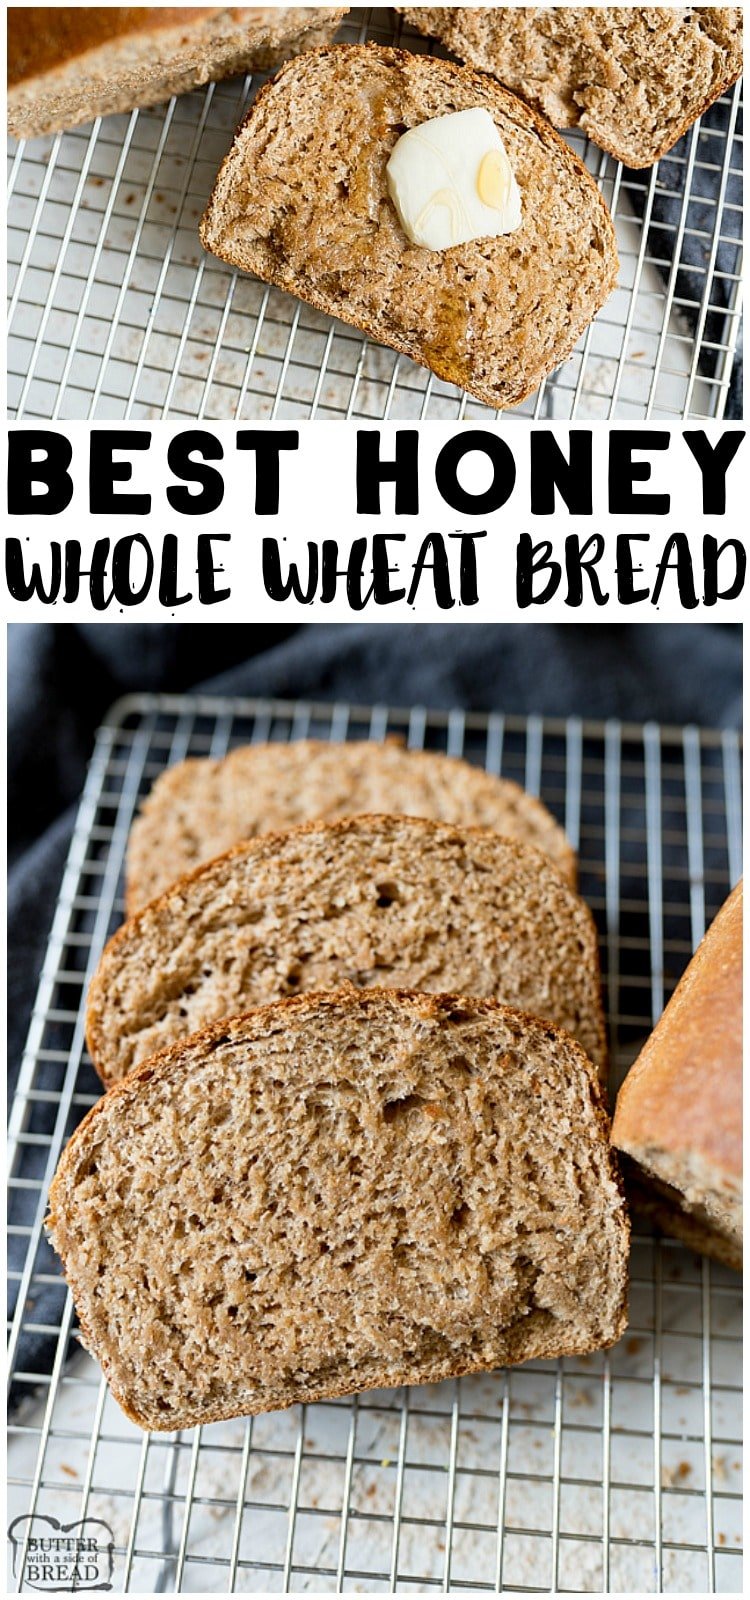 Honey Whole Wheat Bread is a delicious, hearty whole Wheat Bread recipe is perfect for any time of the day and any type of meal. #honeywheat #wholewheat #homemadebread #bread #recipe #baking from Butter With a Side of Bread